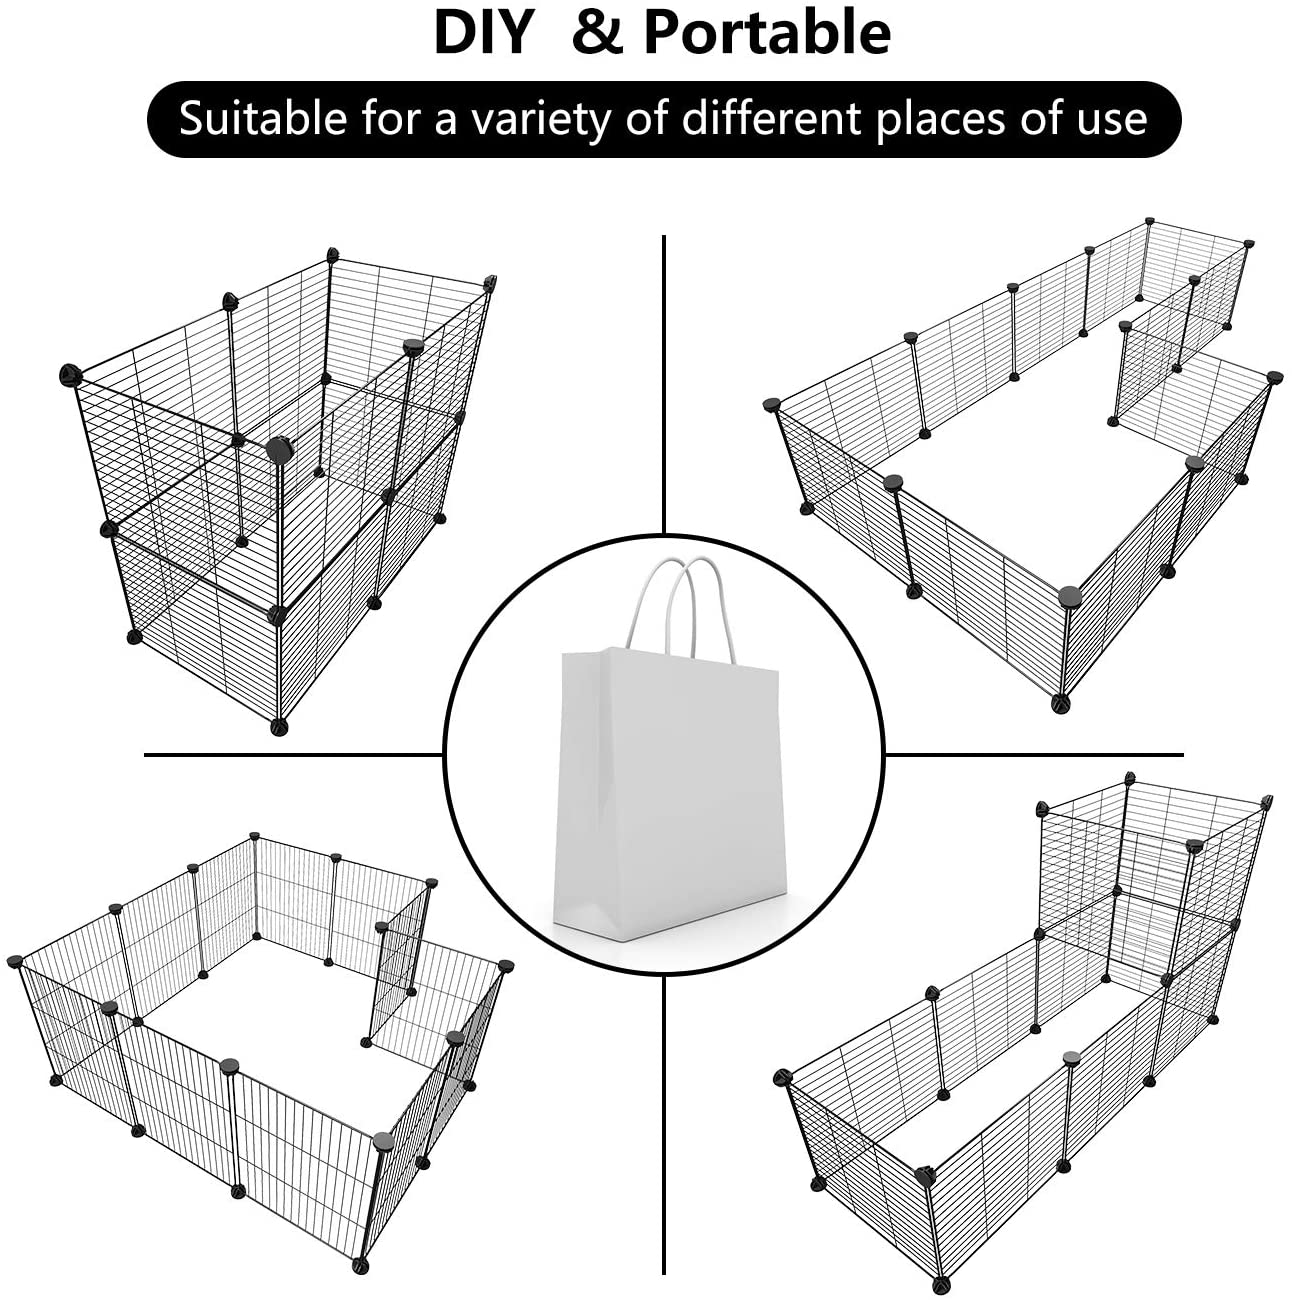 Tespo Pet Playpen, Small Animal Cage Indoor Portable Metal Wire Yd Fence for Small Animals, Guinea Pigs, Rabbits Kennel Crate Fence Tent 15 X 12 Inch